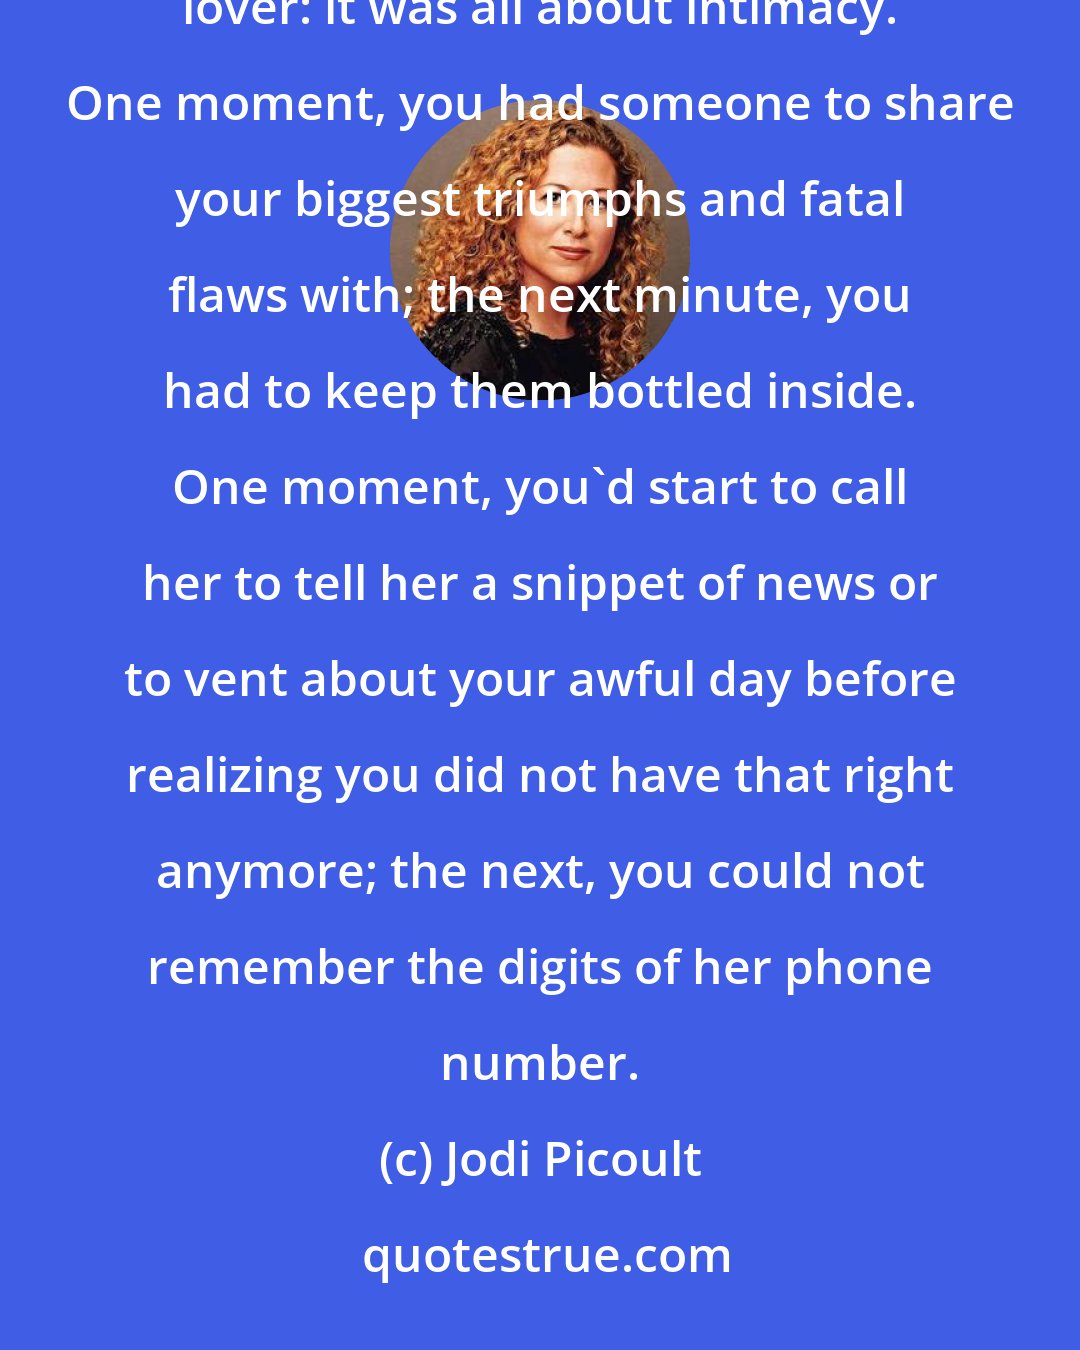 Jodi Picoult: Besides the obvious difference, there was not much distinction between losing a best friend and losing a lover: it was all about intimacy. One moment, you had someone to share your biggest triumphs and fatal flaws with; the next minute, you had to keep them bottled inside. One moment, you'd start to call her to tell her a snippet of news or to vent about your awful day before realizing you did not have that right anymore; the next, you could not remember the digits of her phone number.